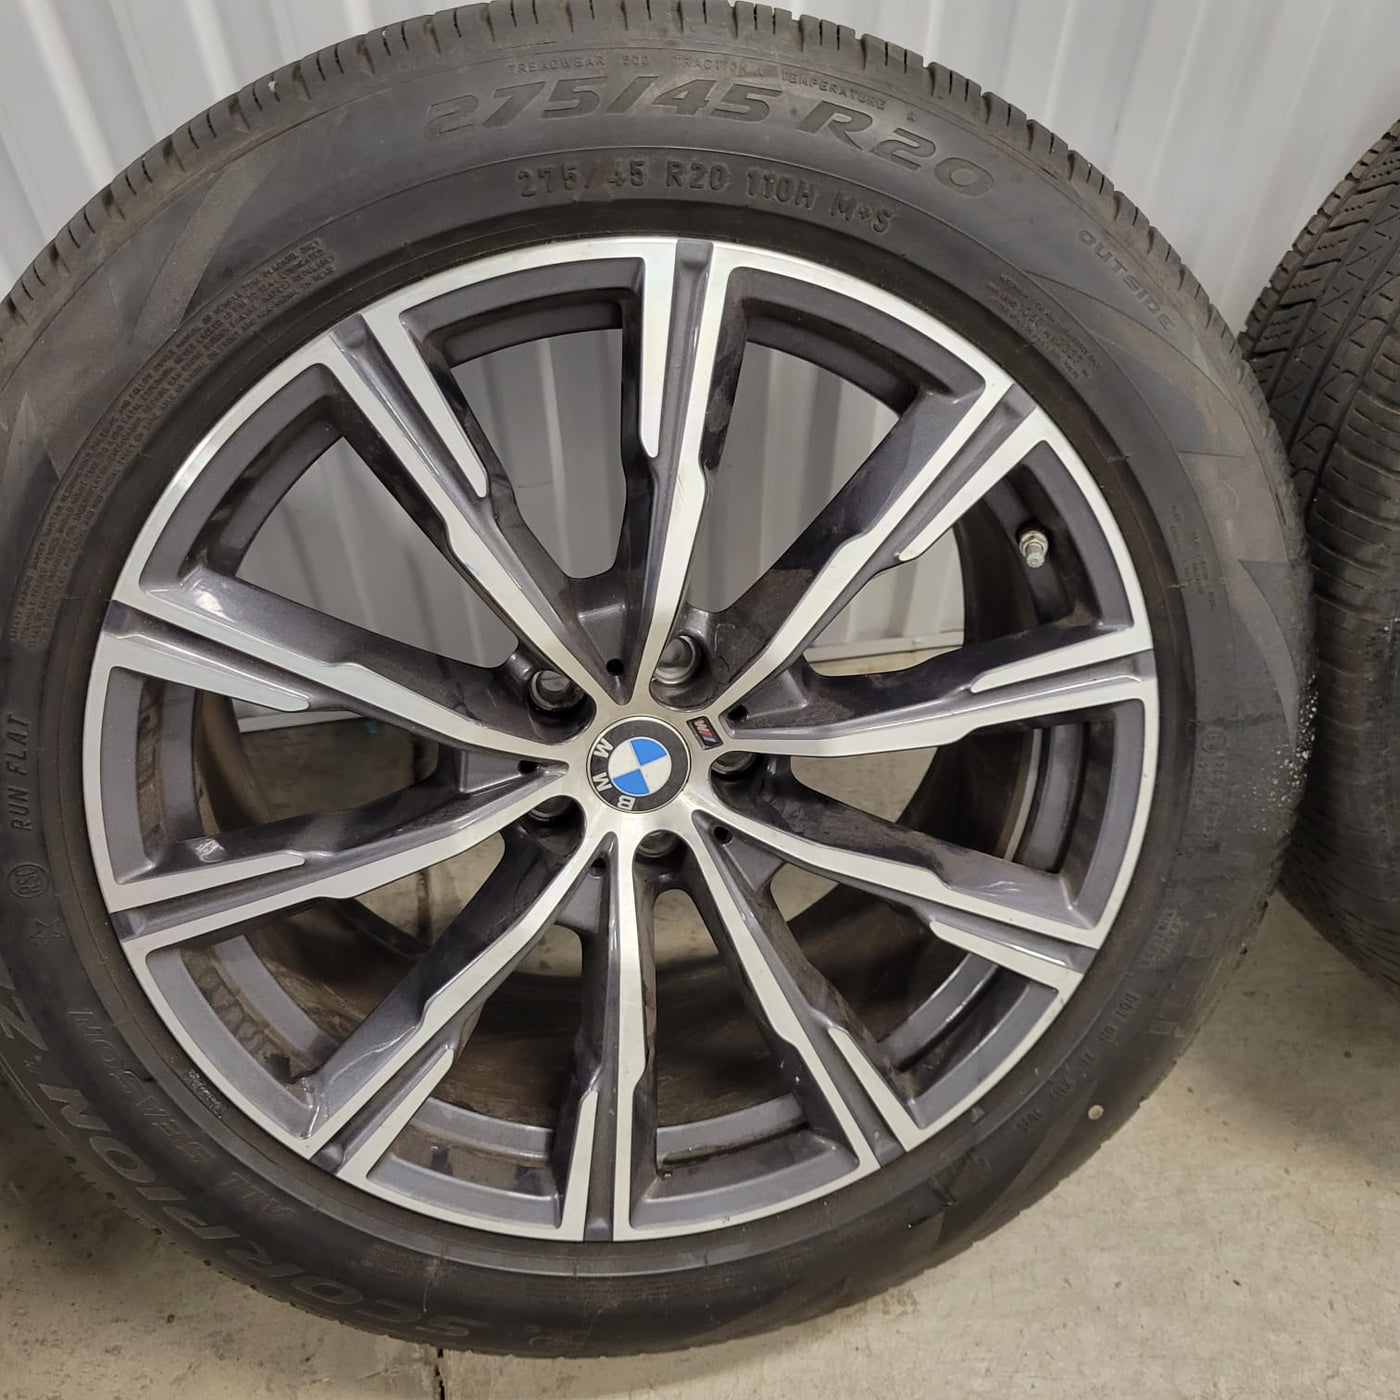 20 Bmw wheels and tires style 740m